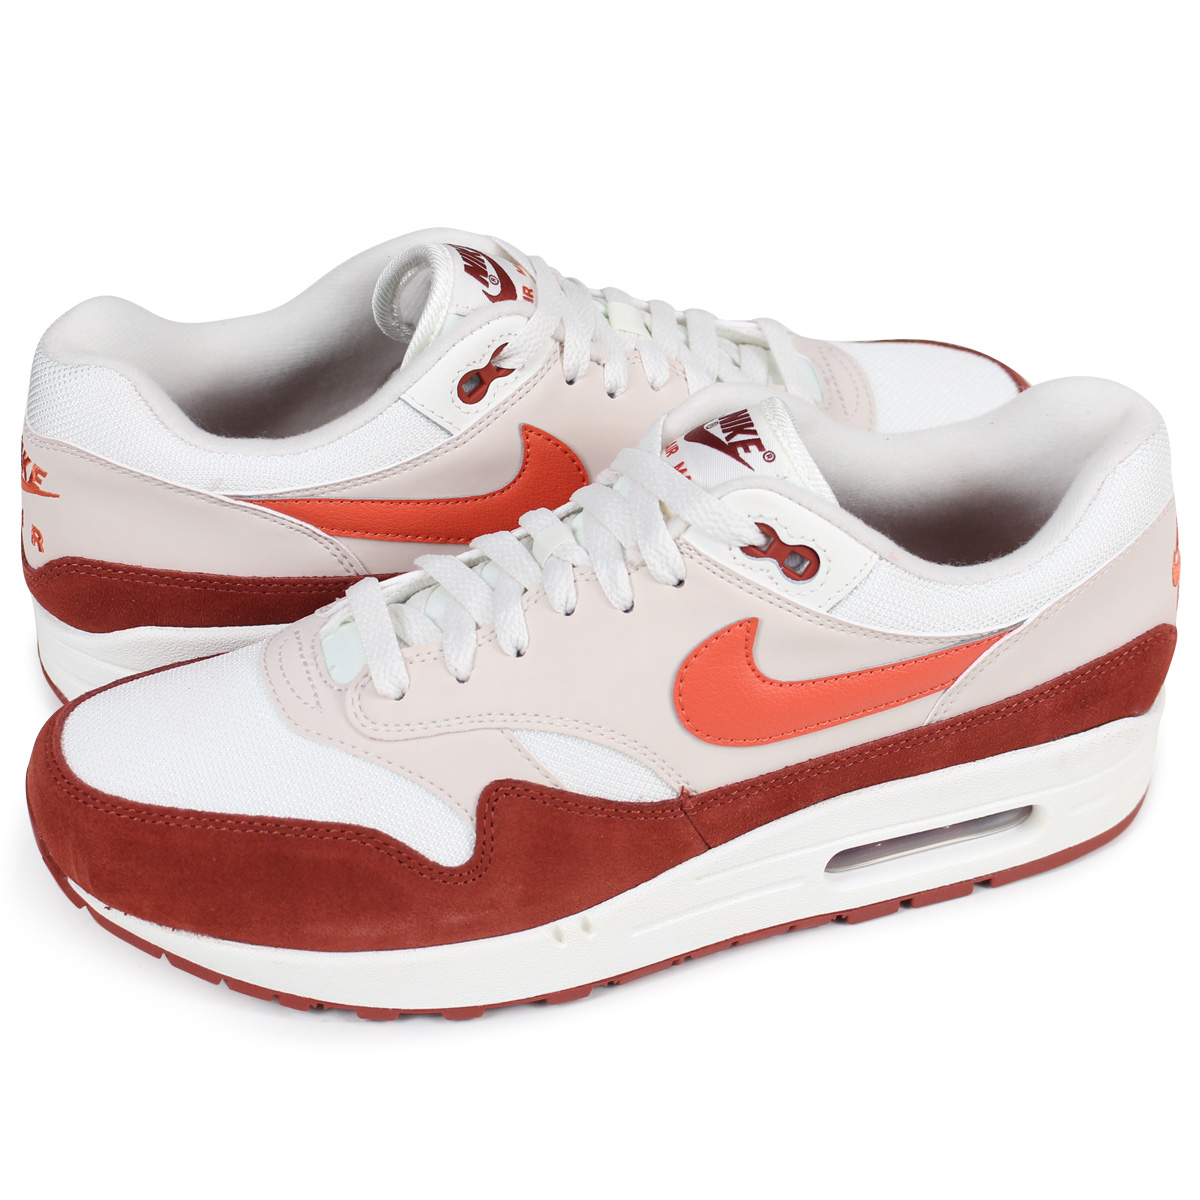 Whats up Sports: NIKE AIR MAX 1 Kie Ney AMAX 1 sneakers men AH8145-104 off-white [load ...